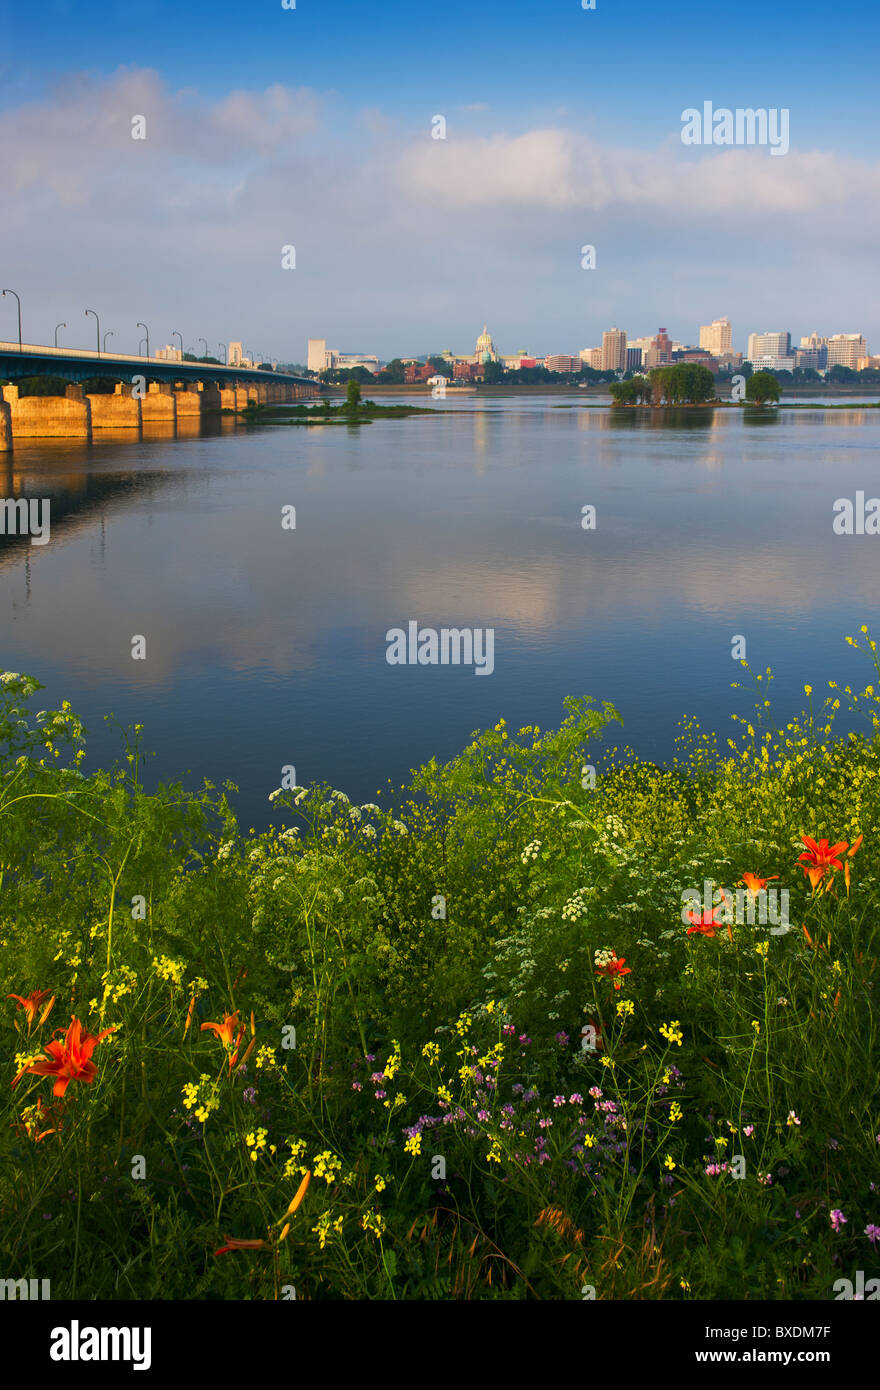 Wildflowers in front of Susquehanna River Stock Photo